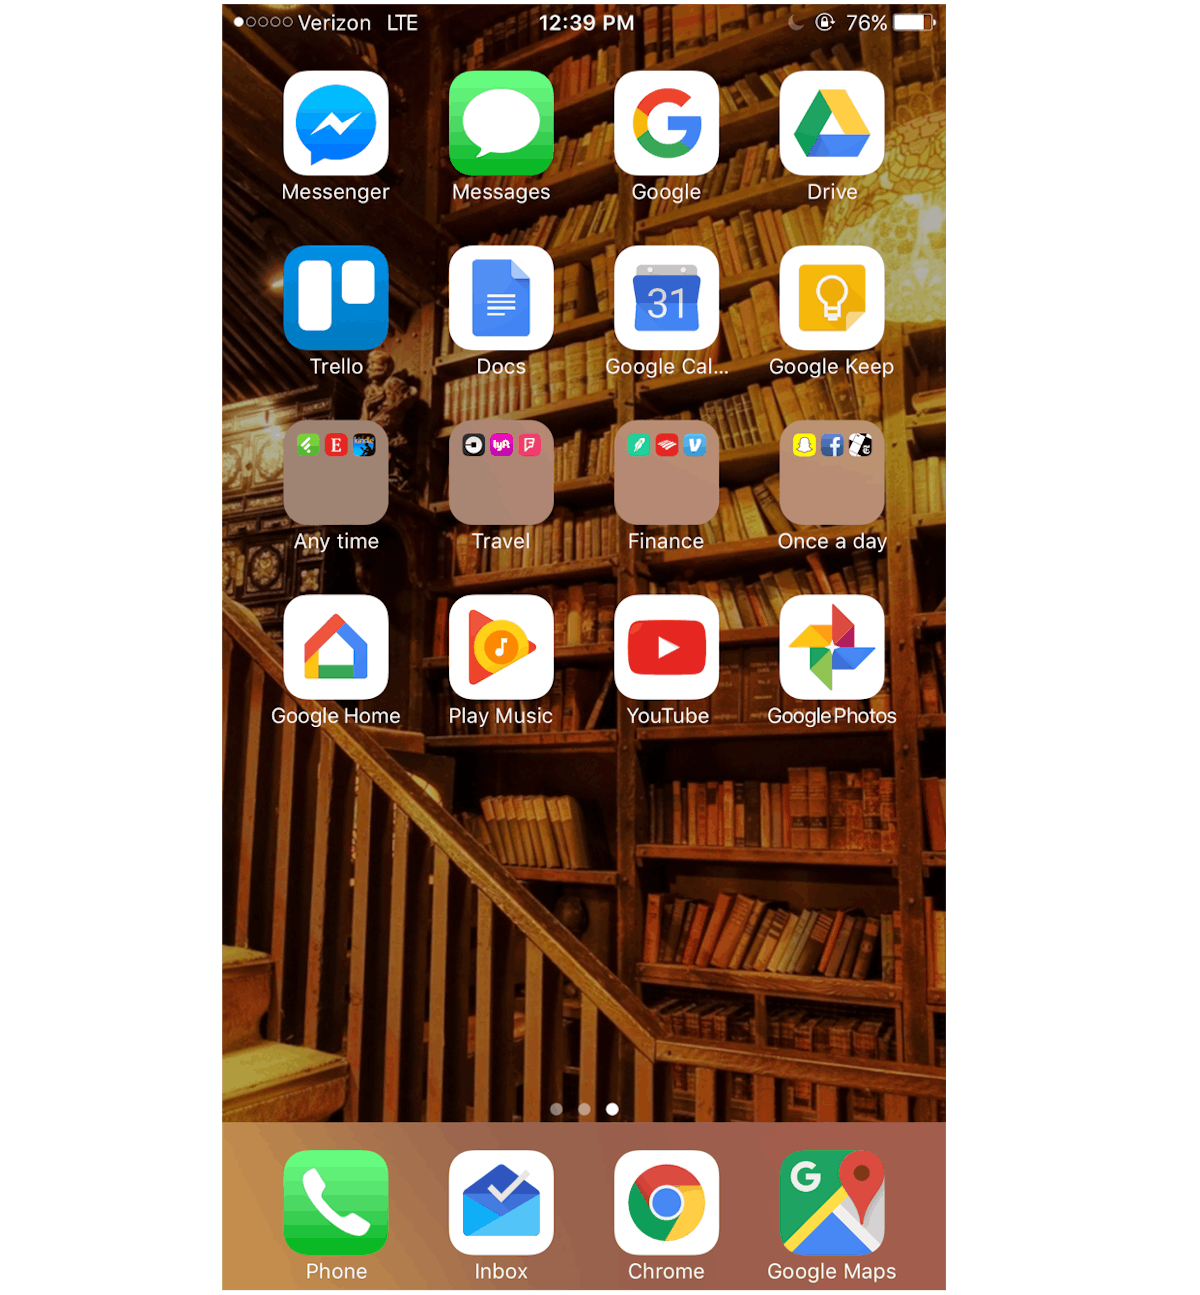 featured image - How I live: My iPhone home screen